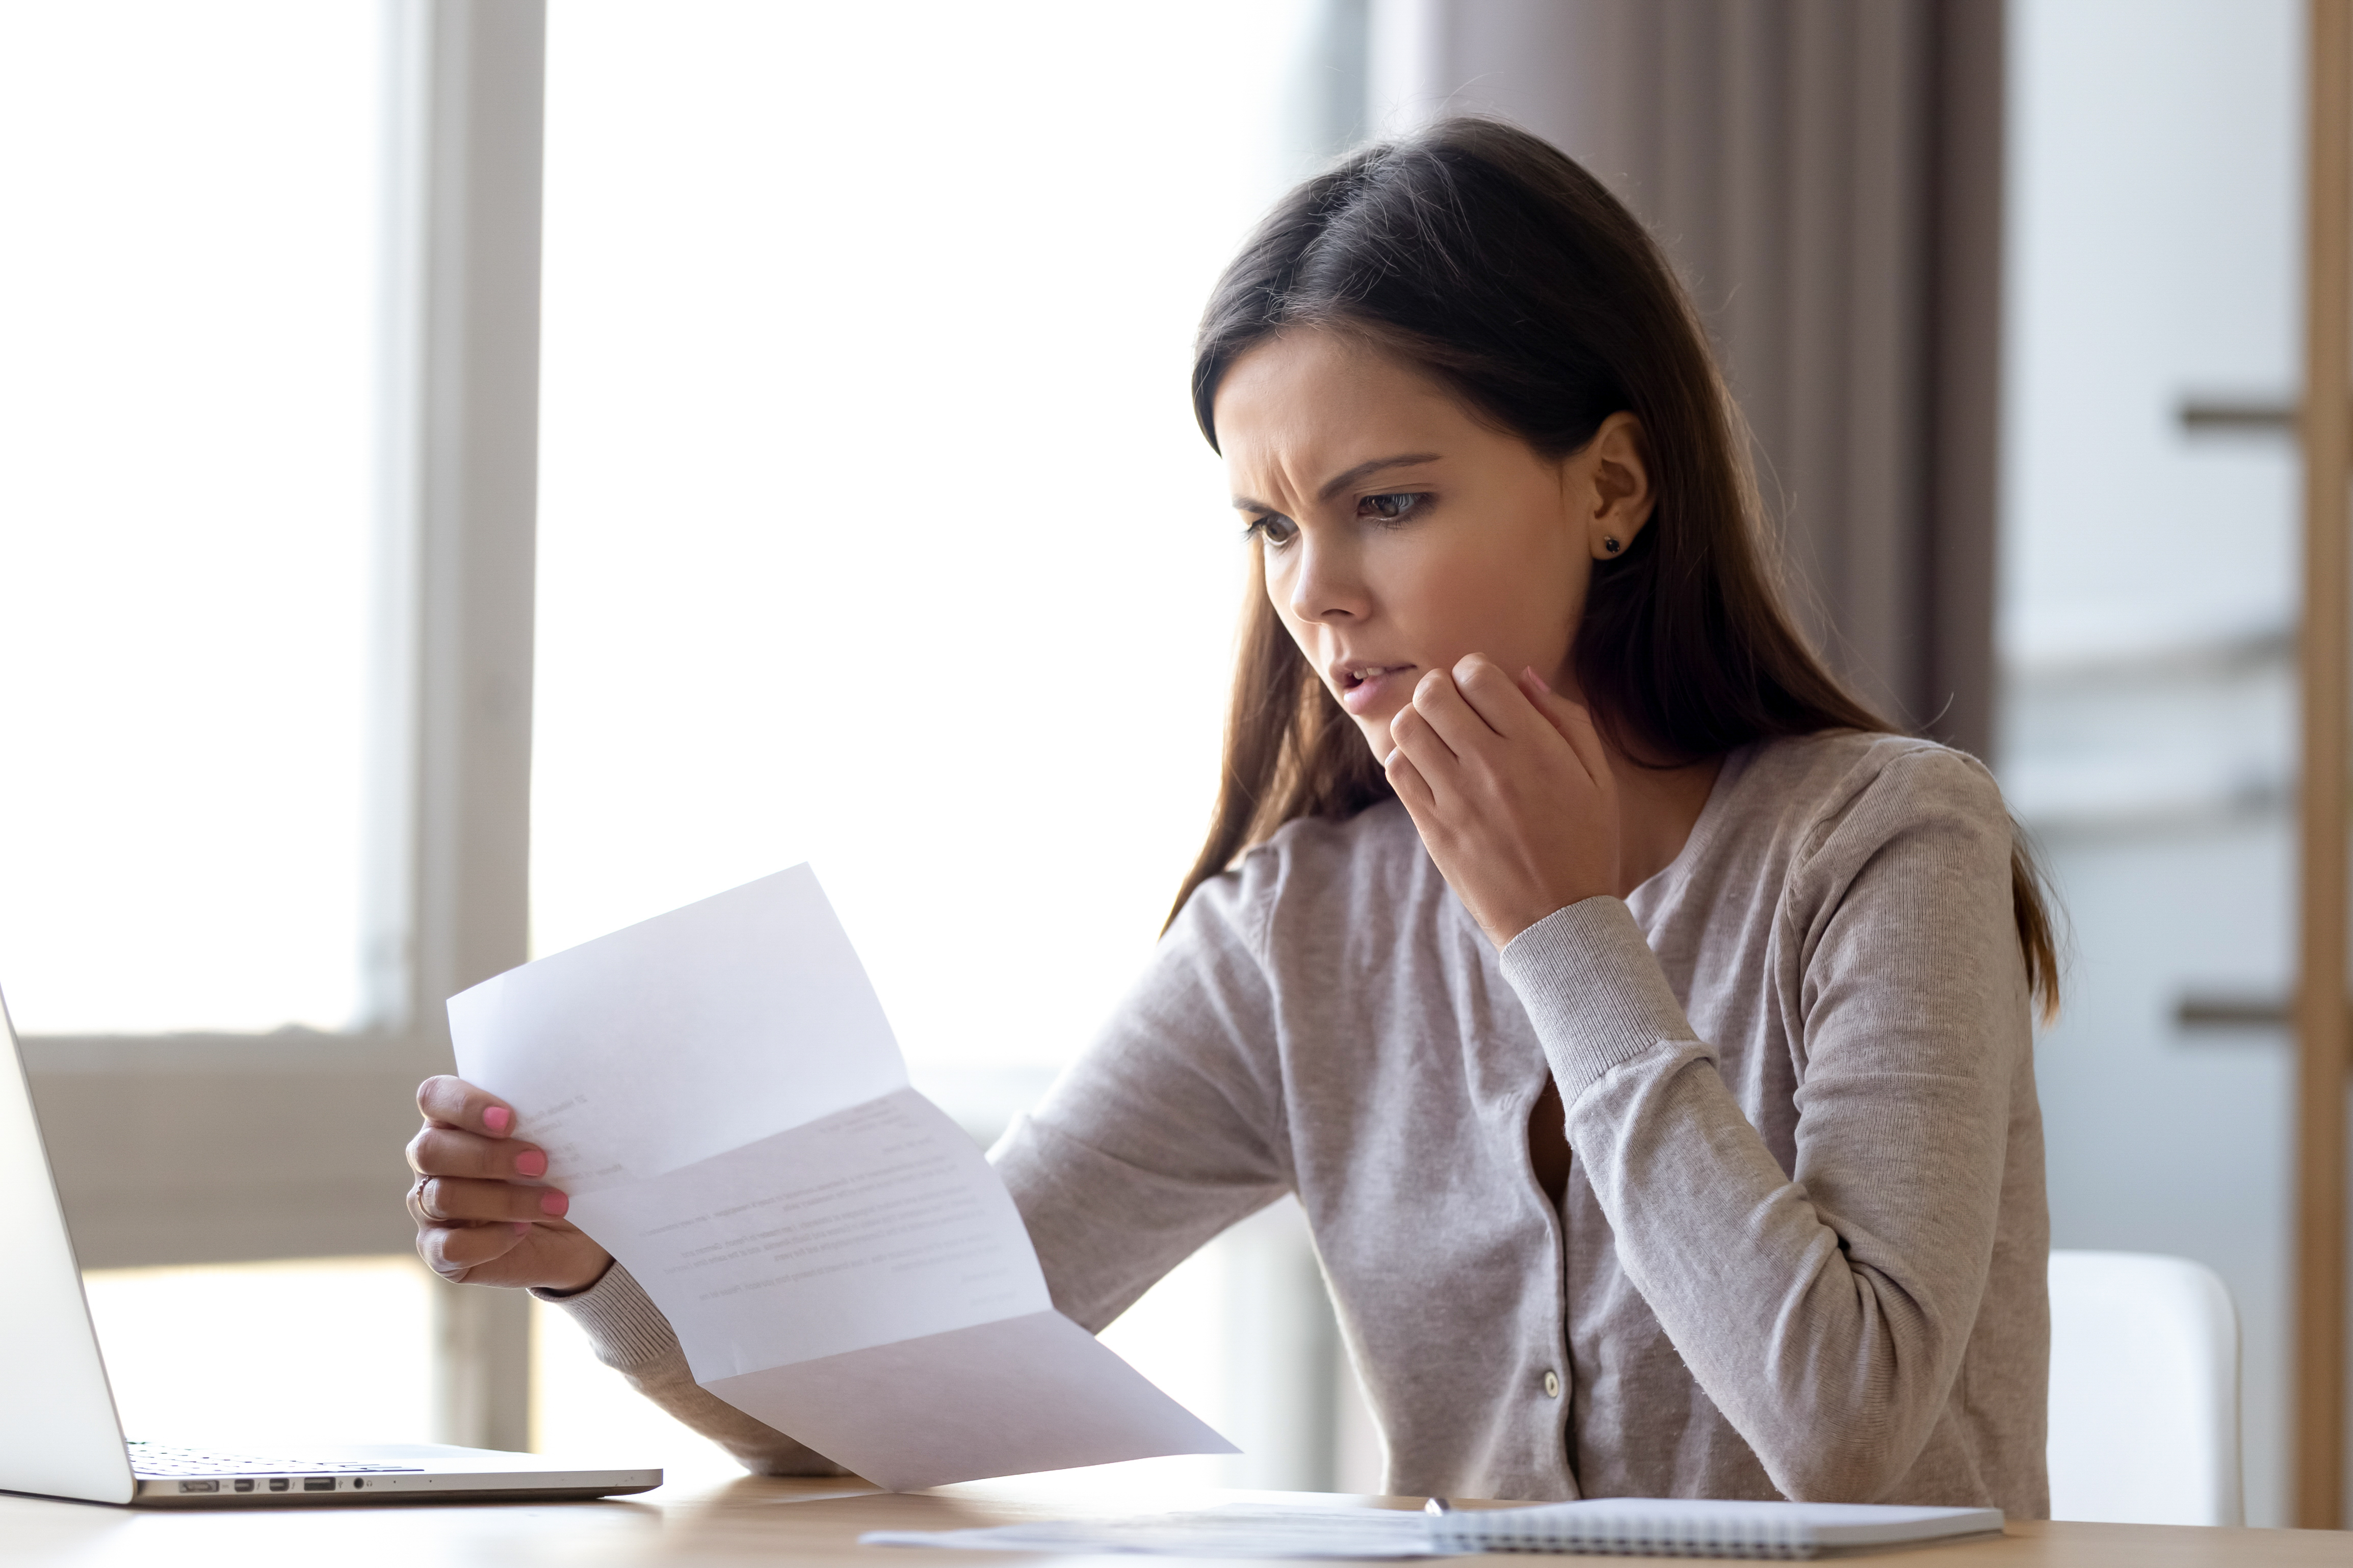 A young woman looking confused as she stares at a piece of paper | Source: Shutterstock